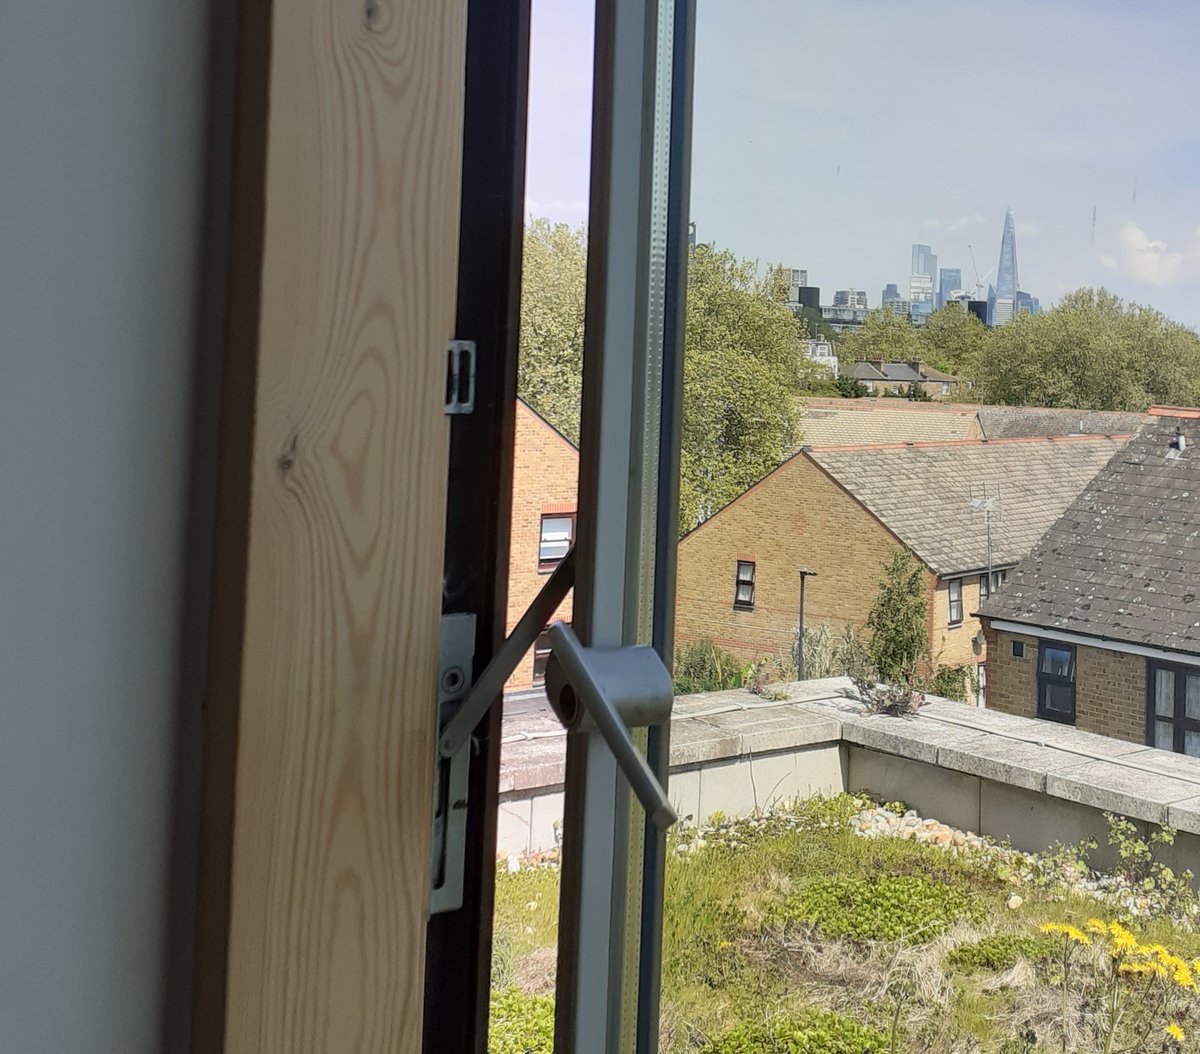 What a beautiful day! Open the windows and enjoy the view - at Lambeth 🌞
#ProudToBeGSTT #patientcare #CelebratingCommunityServices #community  #OurCommunity #OurNHSPeople @NHS @GSTTnhs @gstt